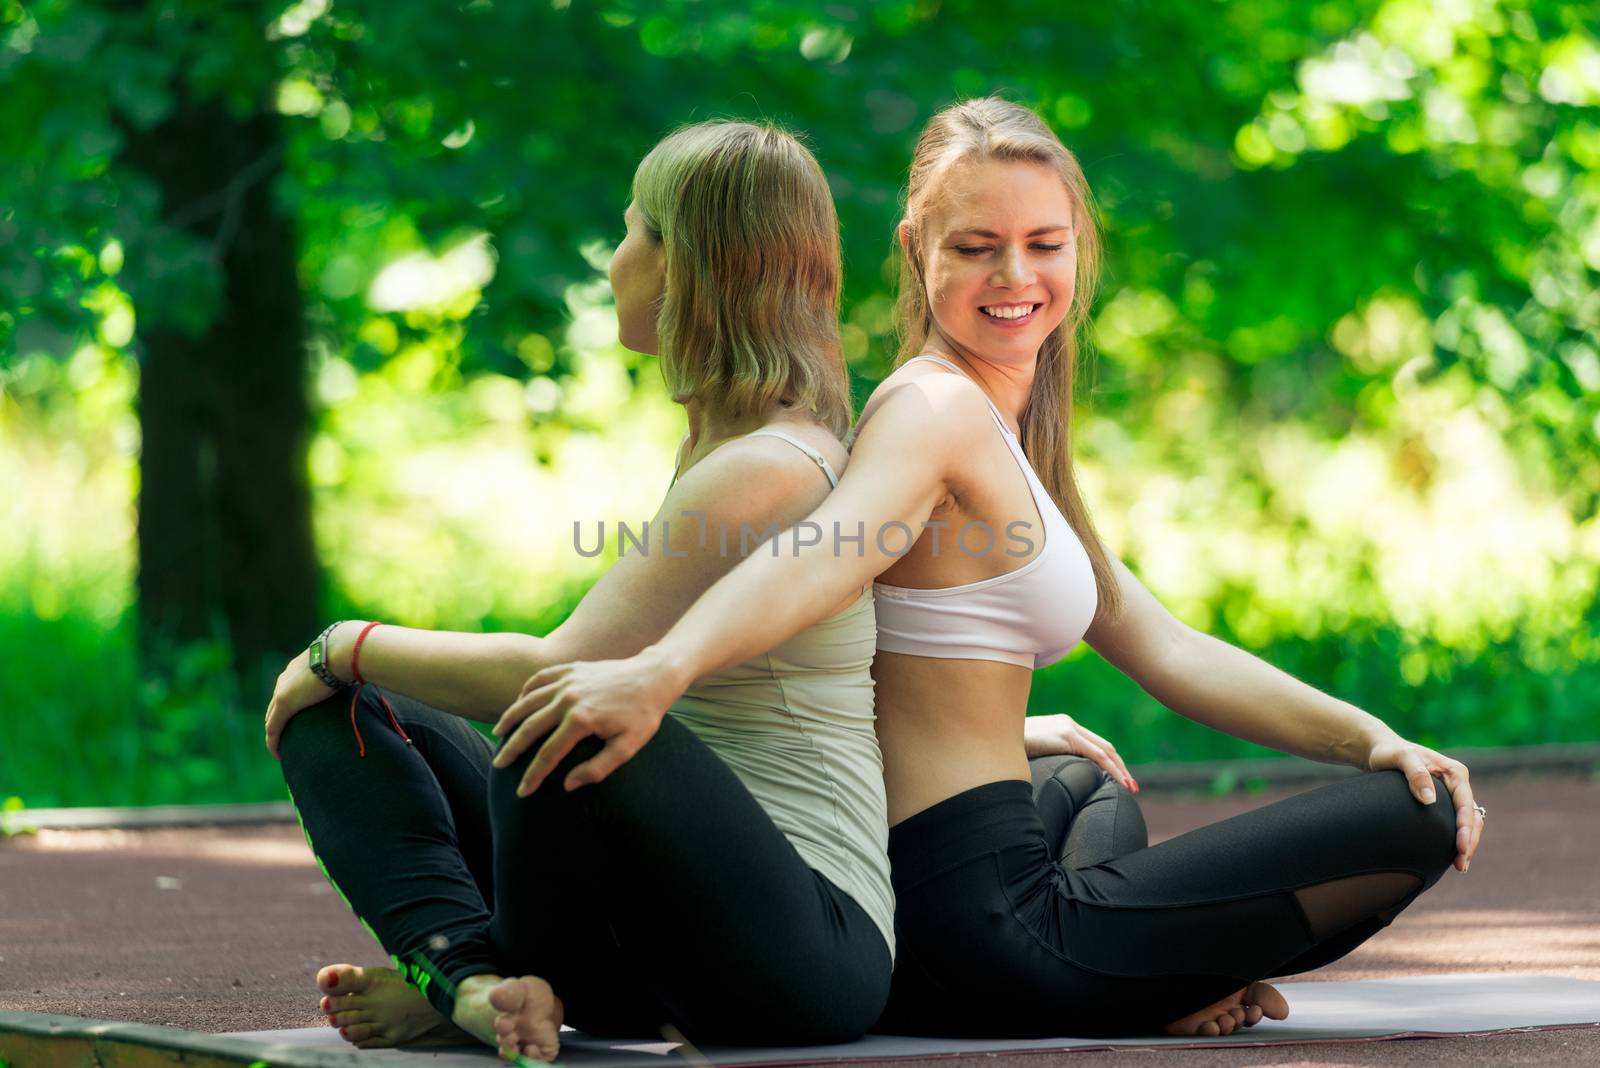 Classes with an individual yoga trainer in the park on a sunny summer day, portrait of active women